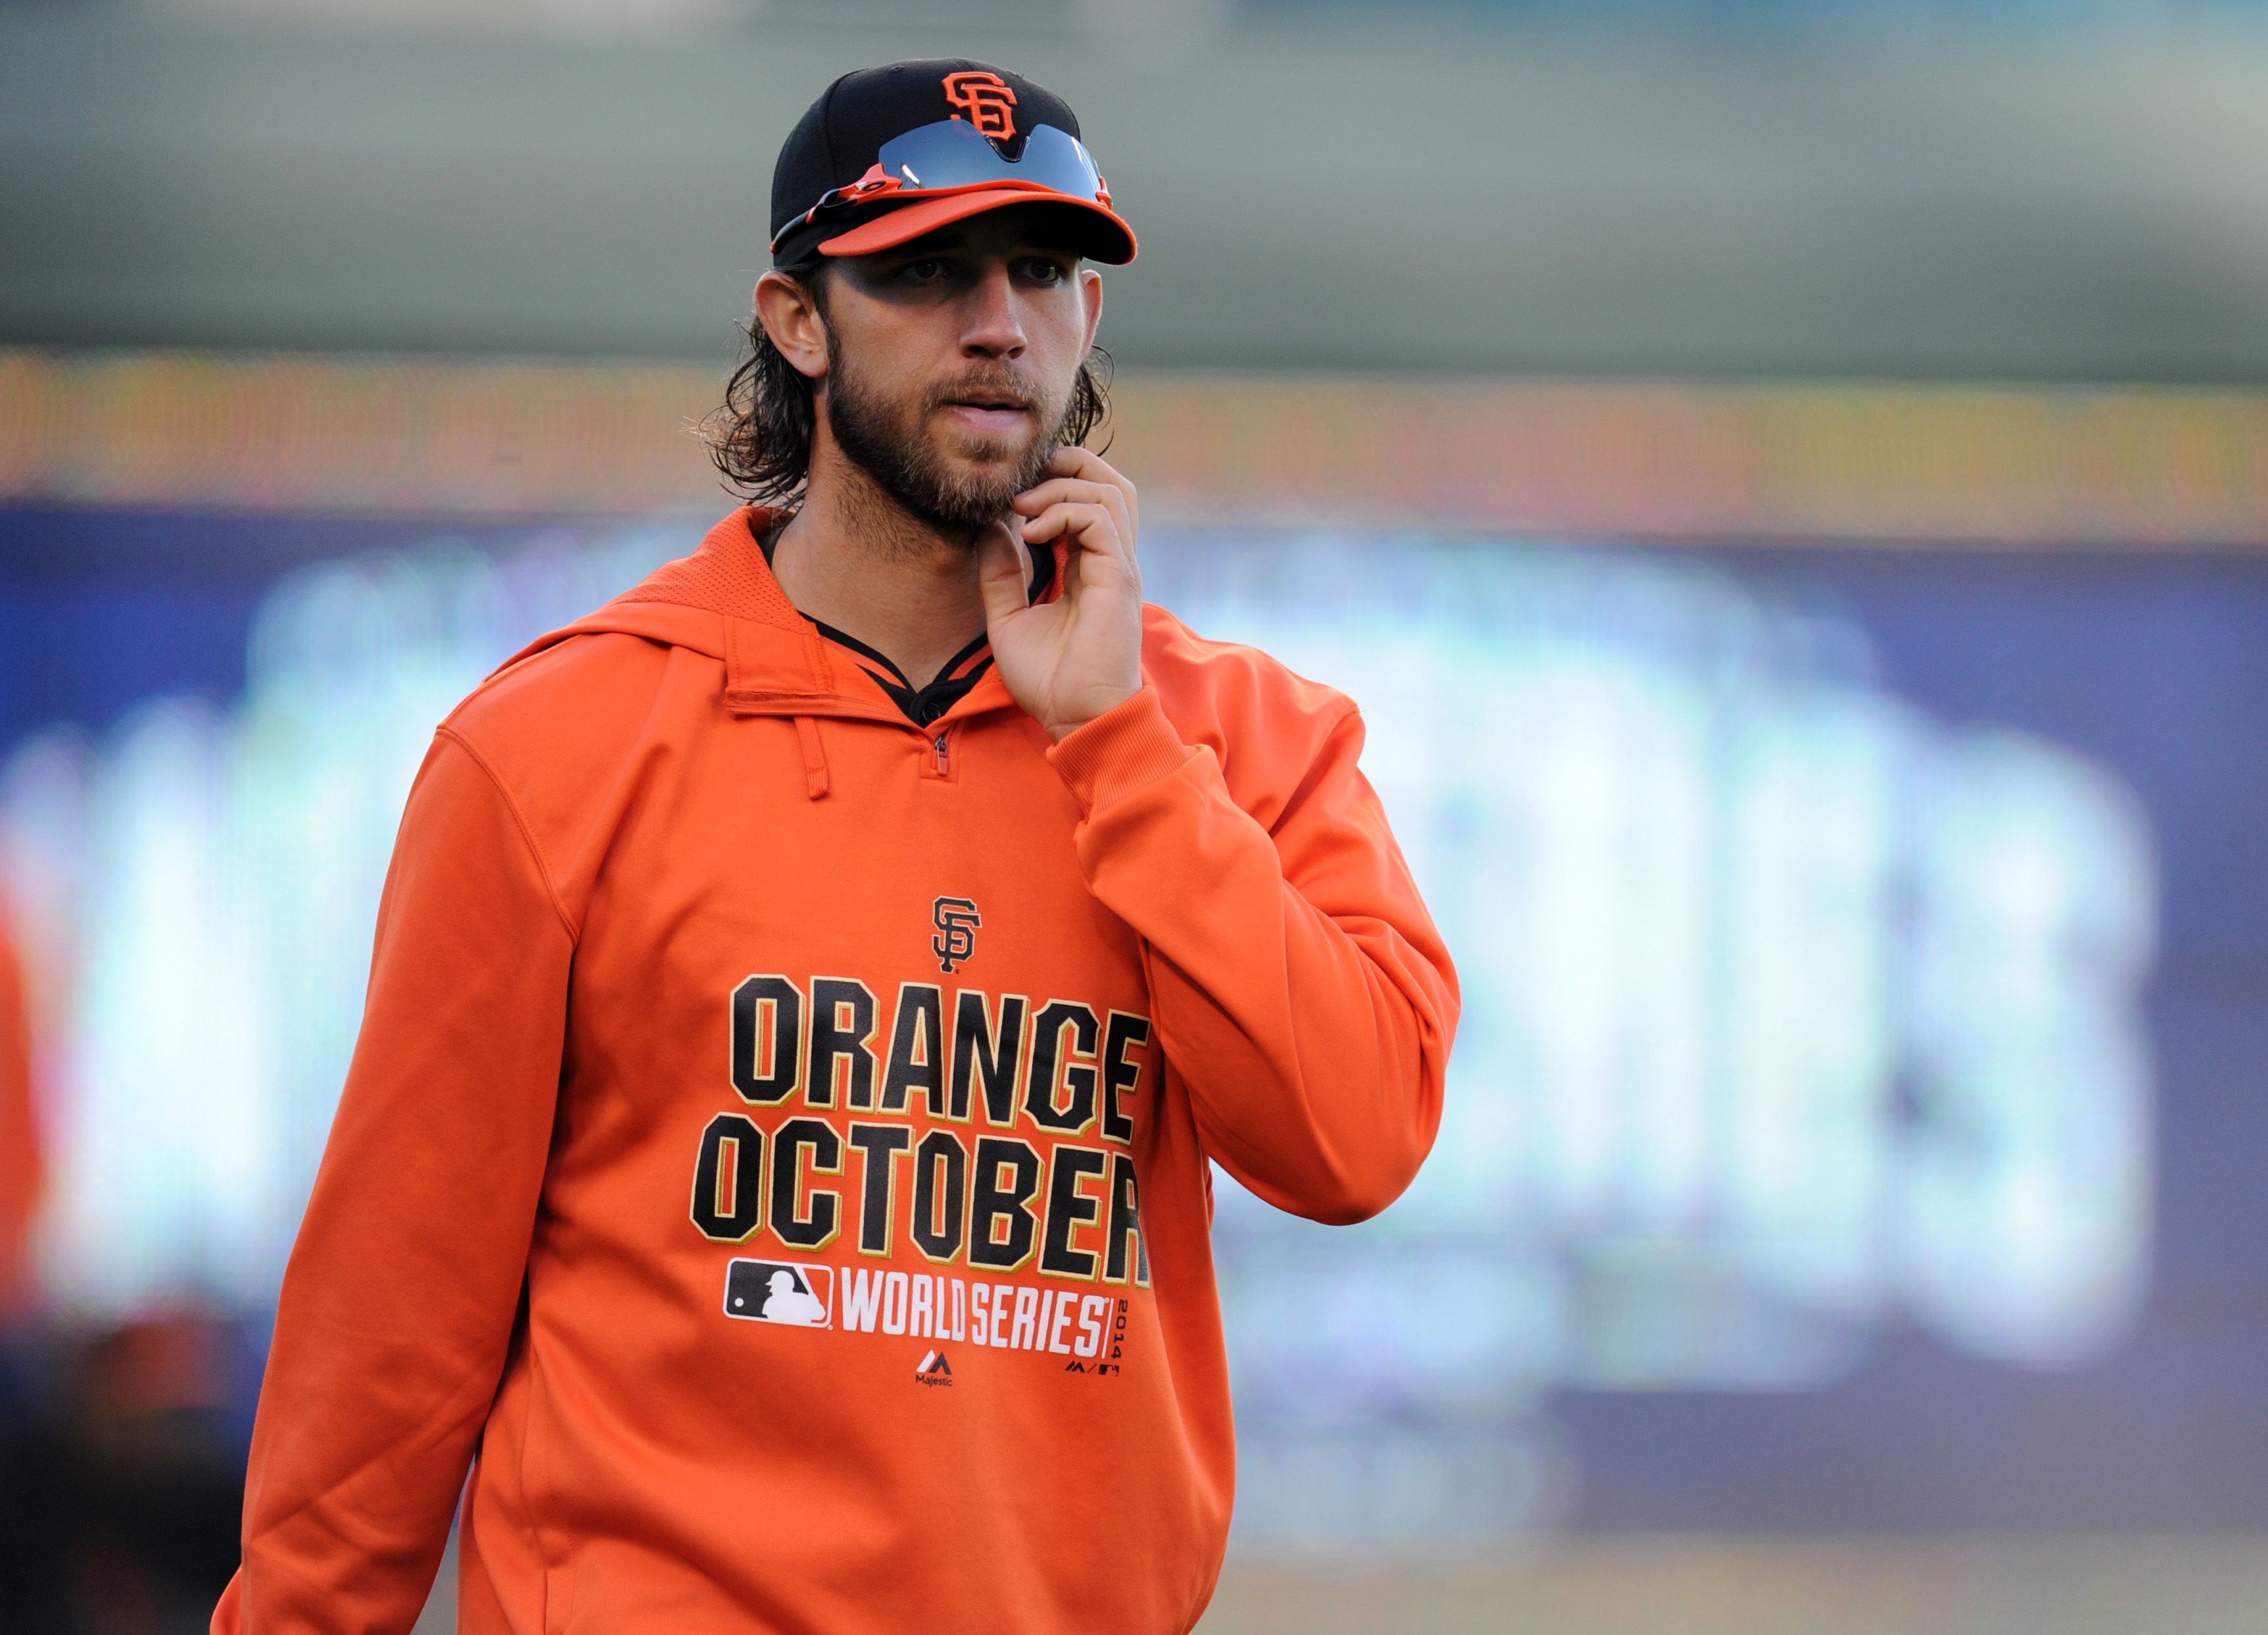 Madison Bumgarner's wife plays catch with him on his off days